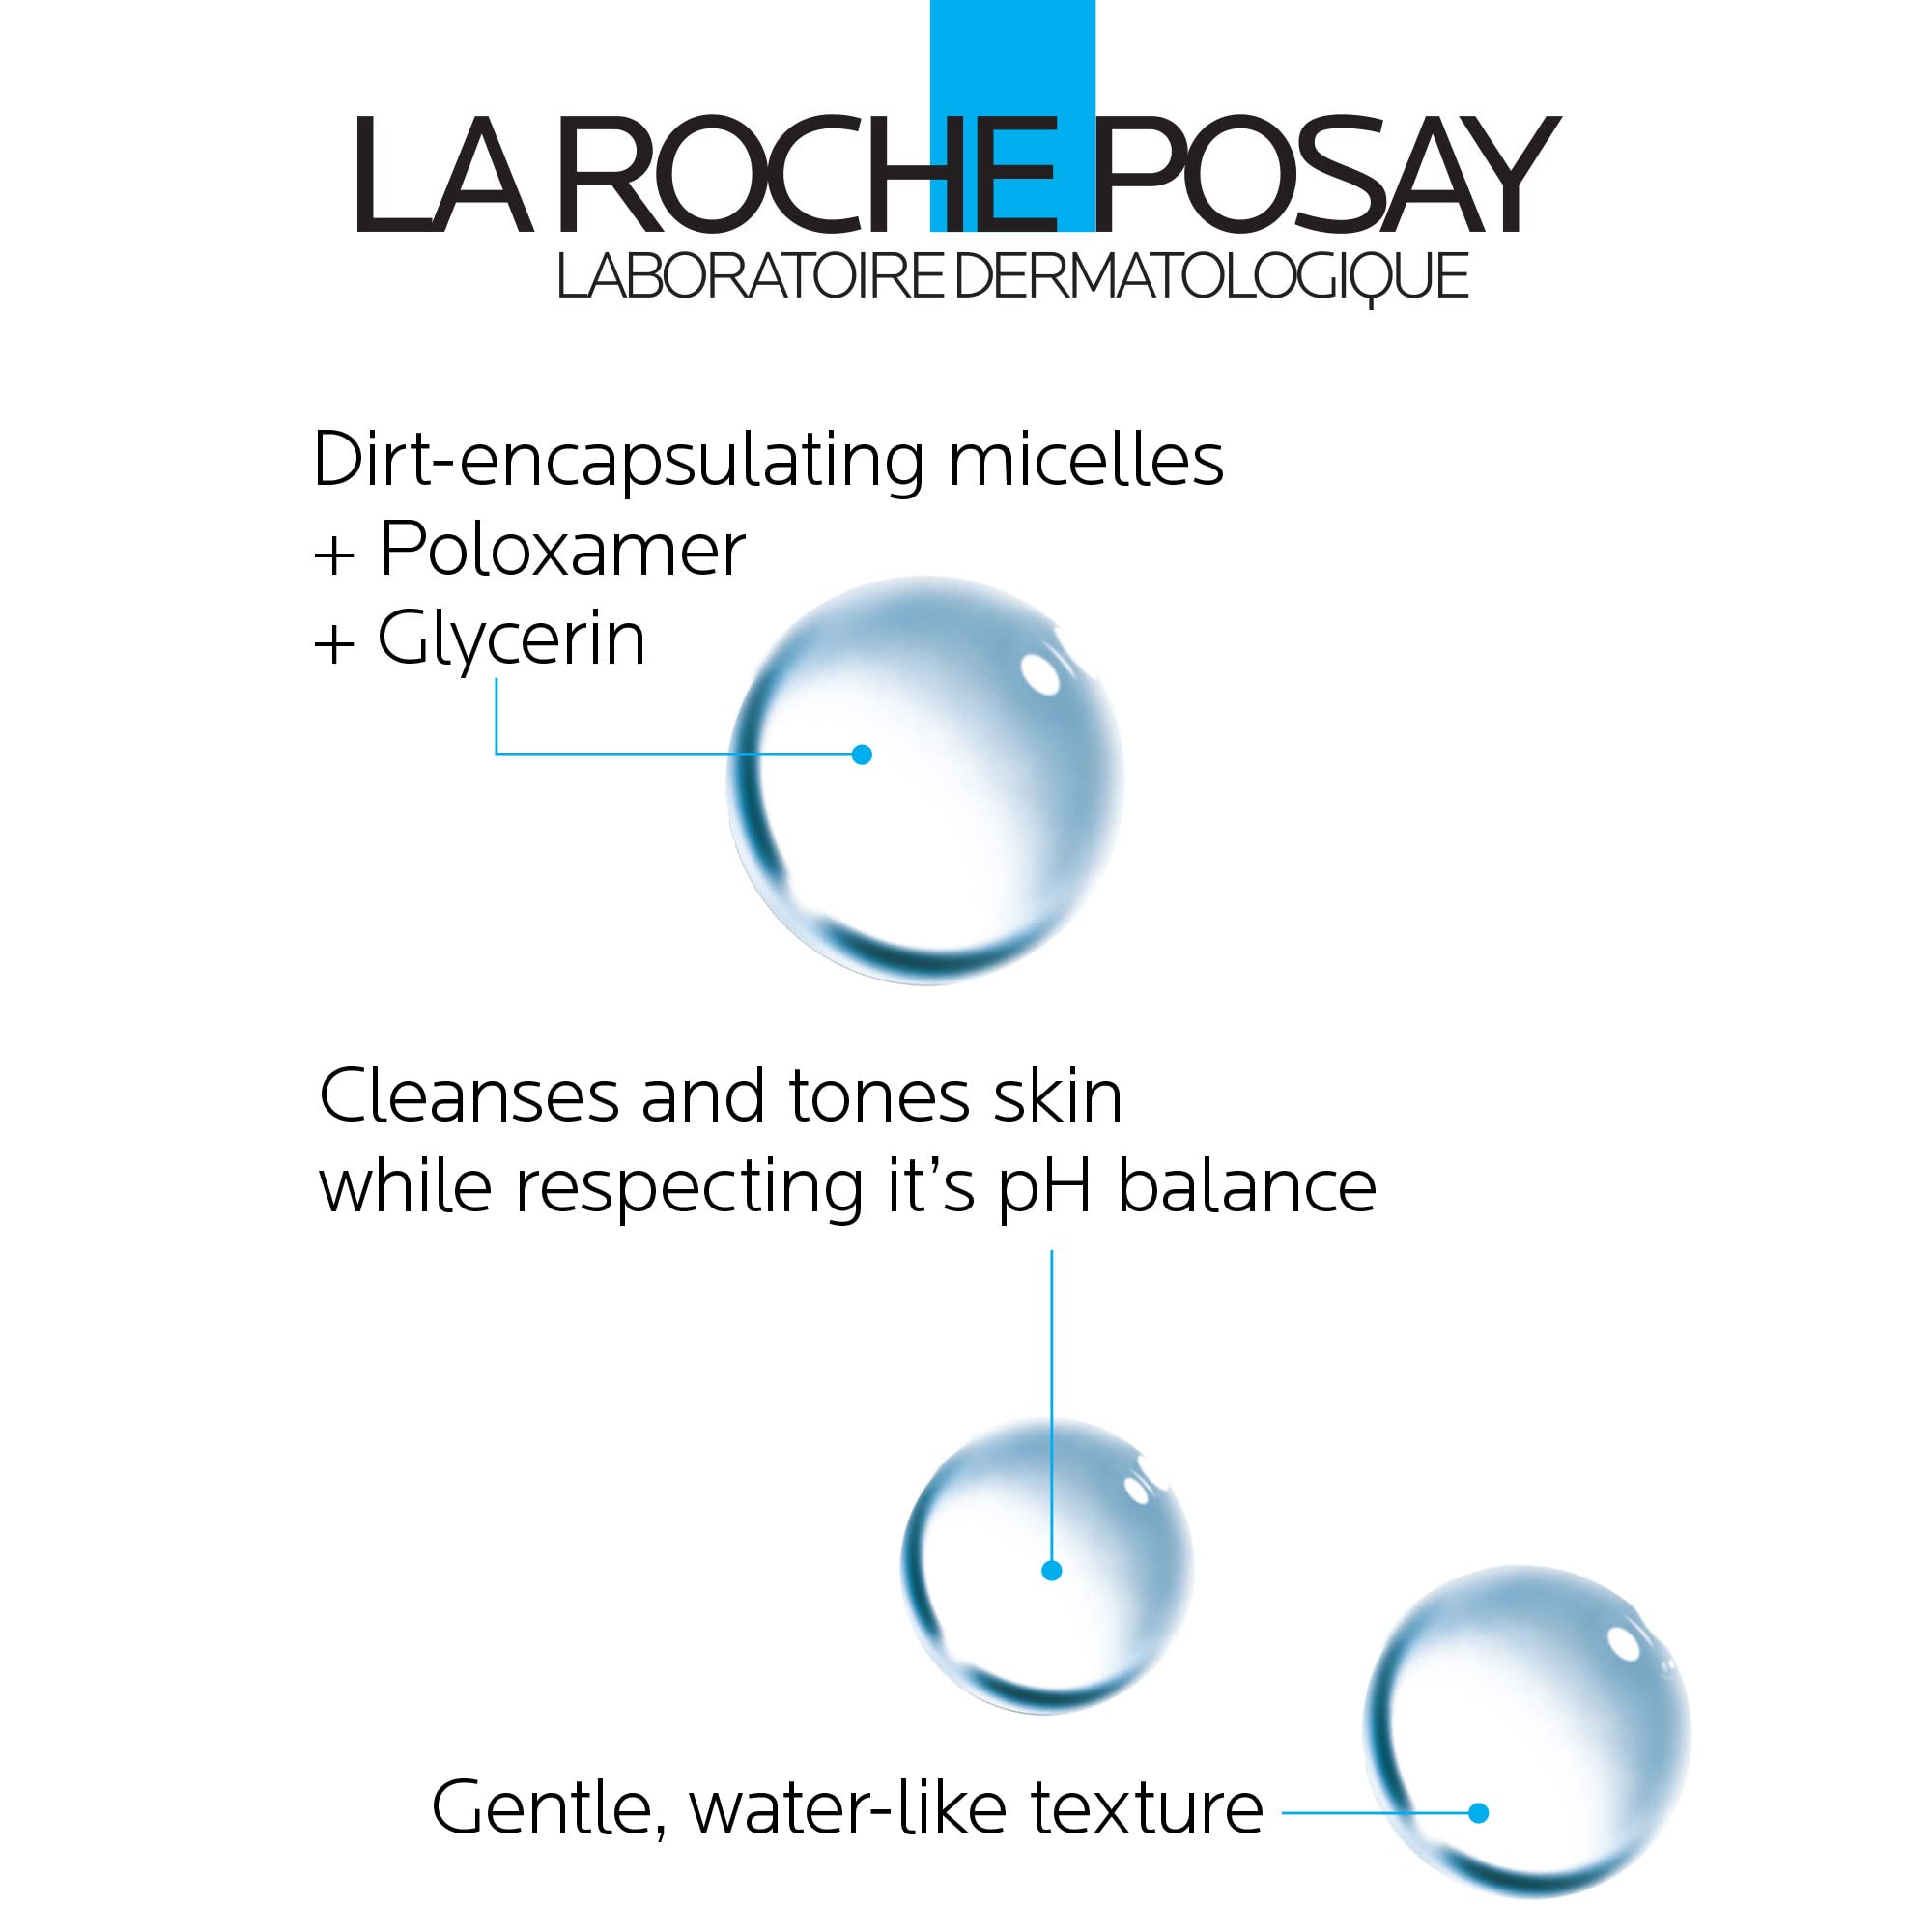 La Roche-Posay Micellar Cleansing Water for Sensitive Skin, Micellar Water Makeup Remover, Cleanses and Hydrates Skin, Gentle Face Toner, Oil Free and Alcohol Free